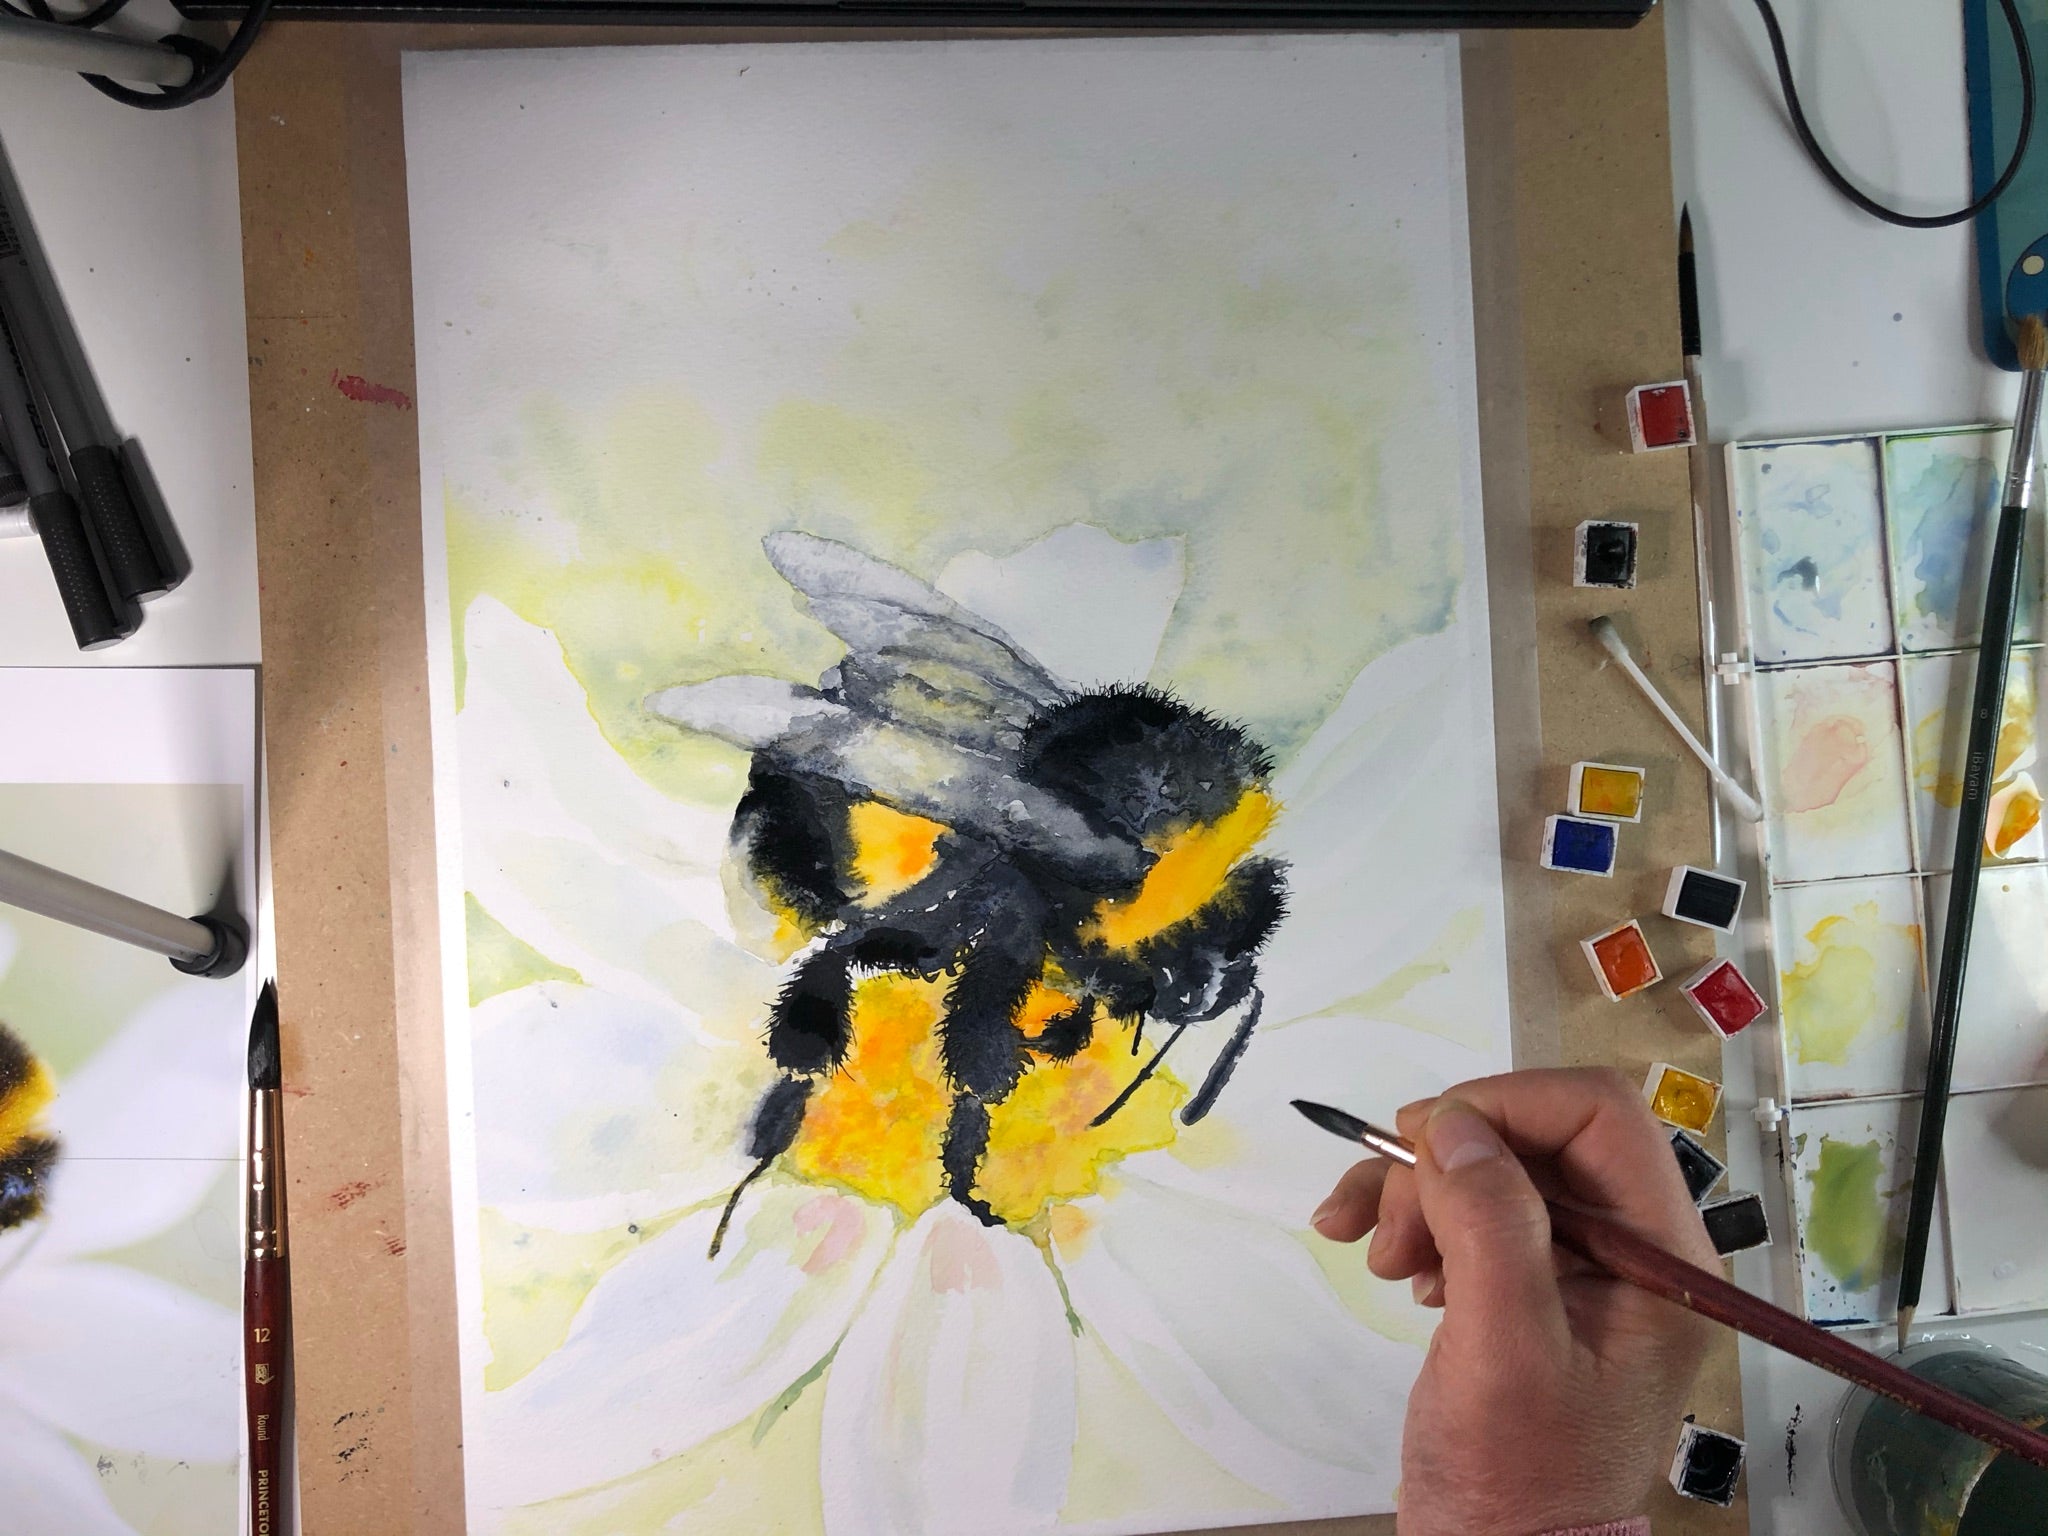 80+Watercolor Painting Tutorials & LIVE Support from Professional Artists -  Beebly's Watercolor Painting